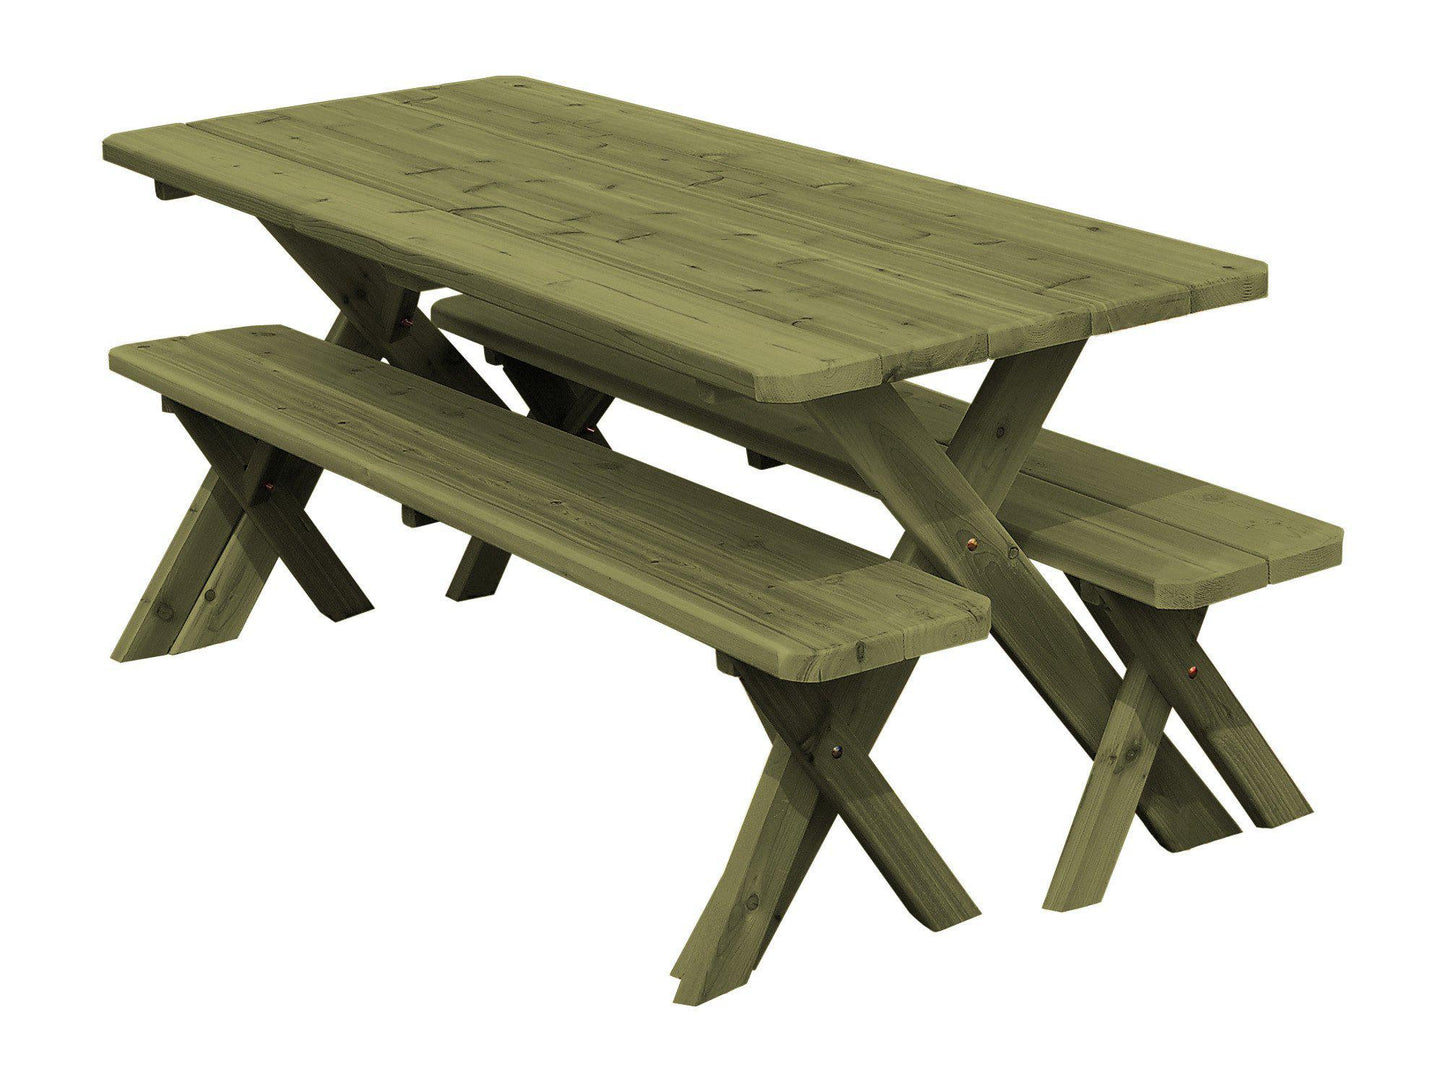 A&L FURNITURE CO. Western Red Cedar 94" Cross-leg Table w/2 Benches - Specify for FREE 2" Umbrella Hole - LEAD TIME TO SHIP 4 WEEKS OR LESS